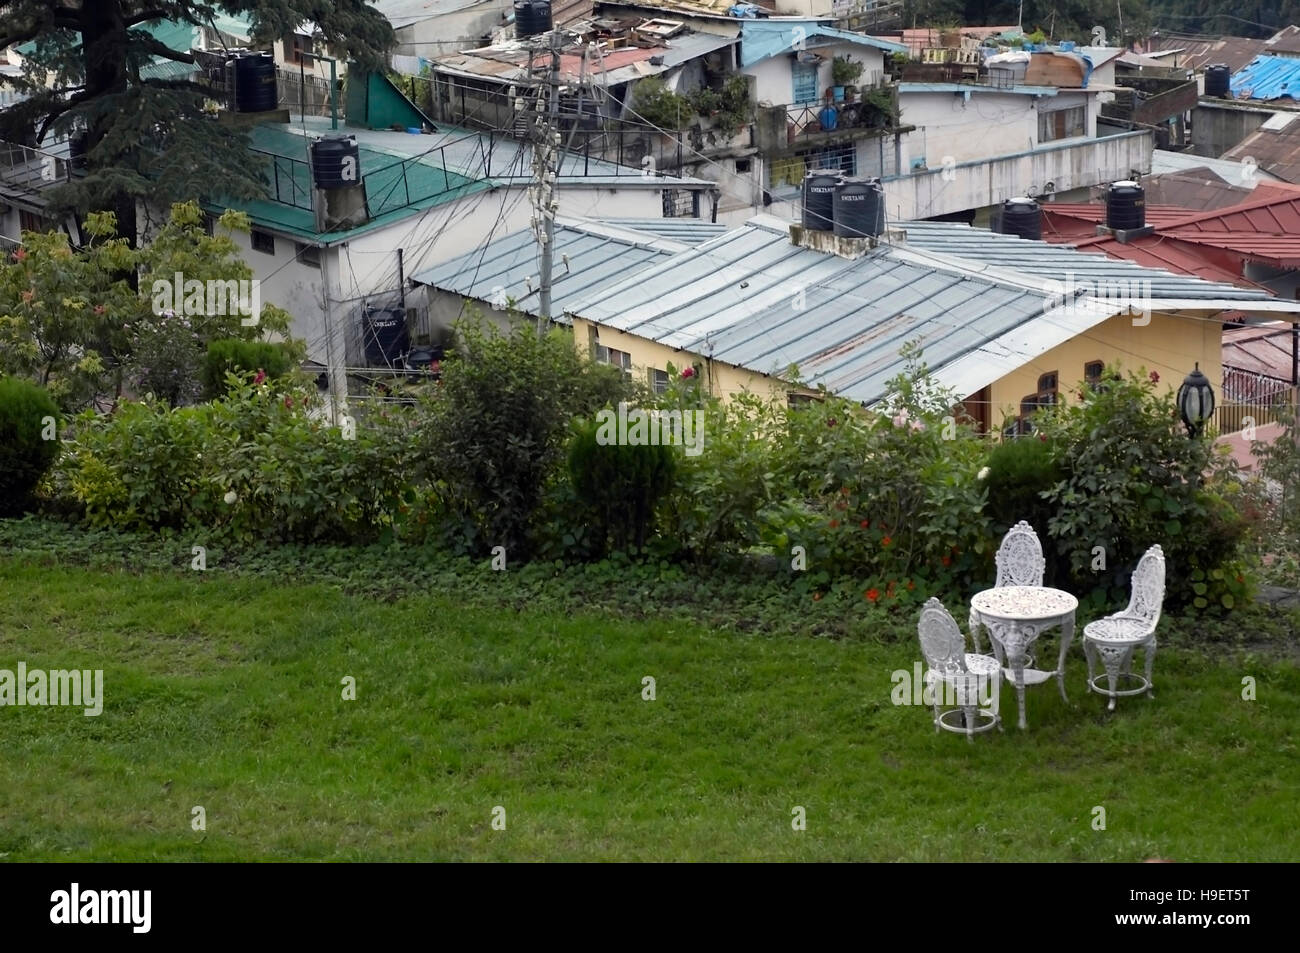 Nainital - view of rooftops, lawn and wrought iron chairs. Uttaranchal, India. Stock Photo